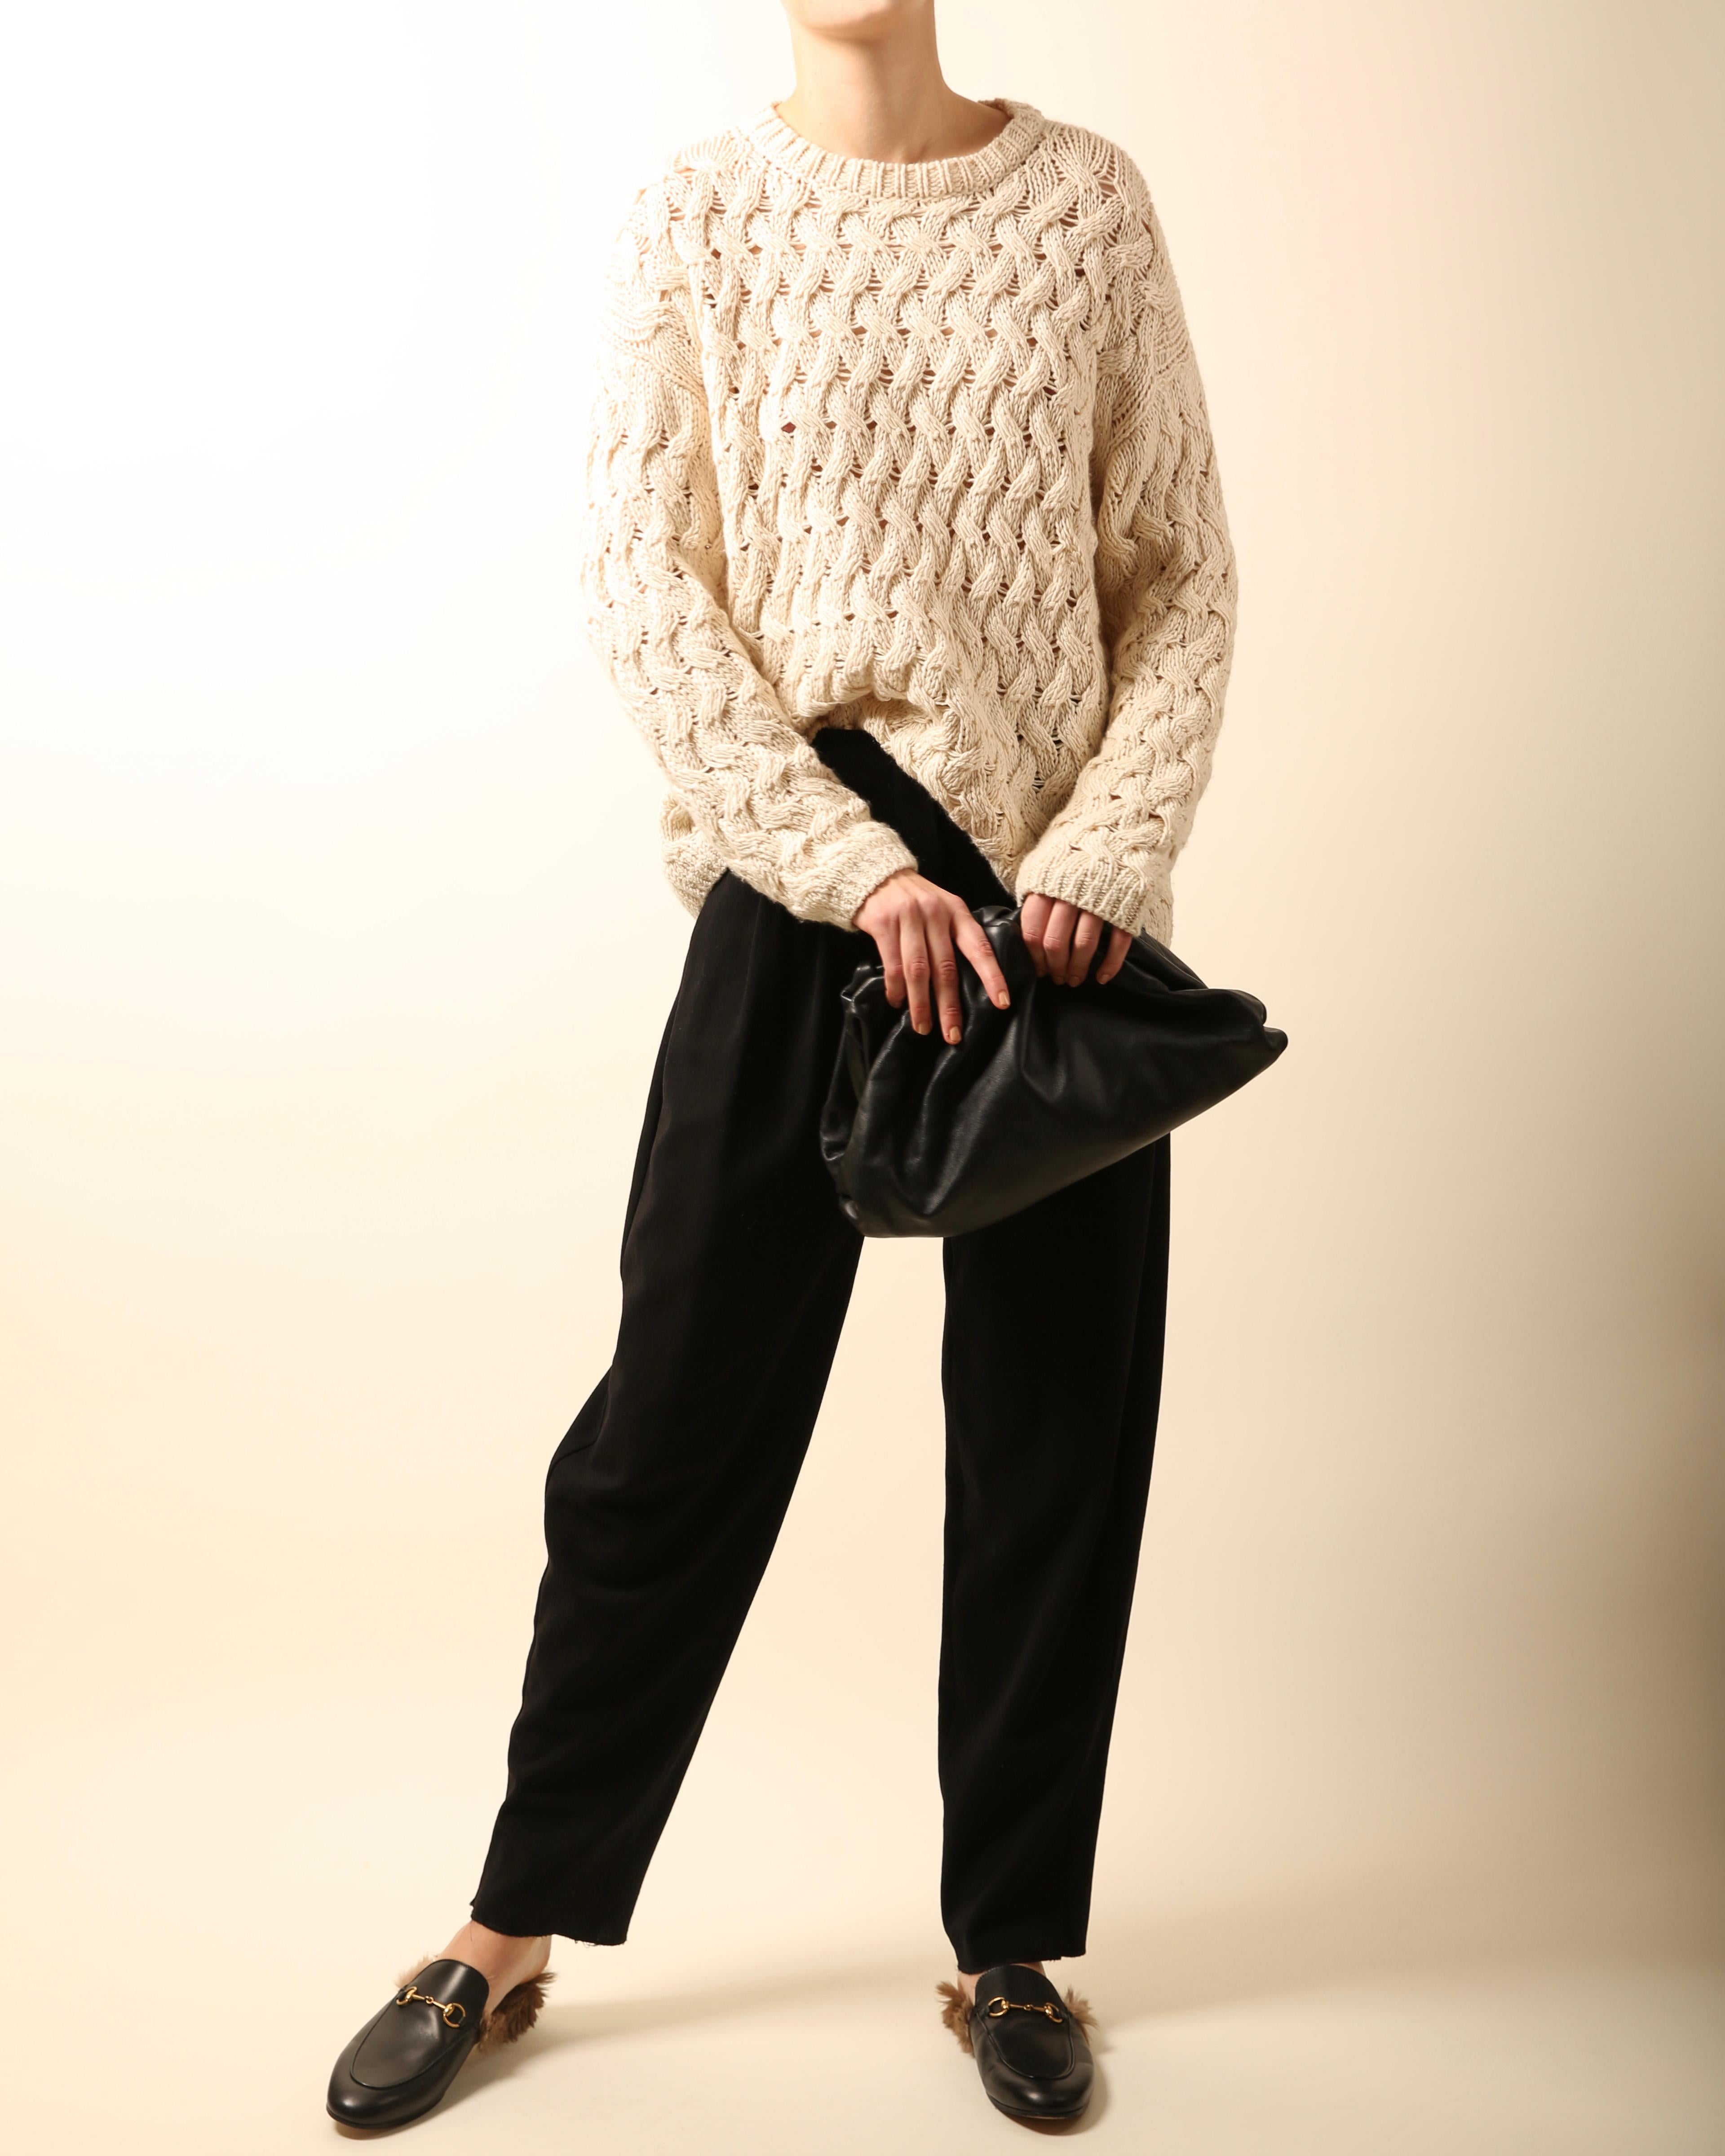 loose knit sweater